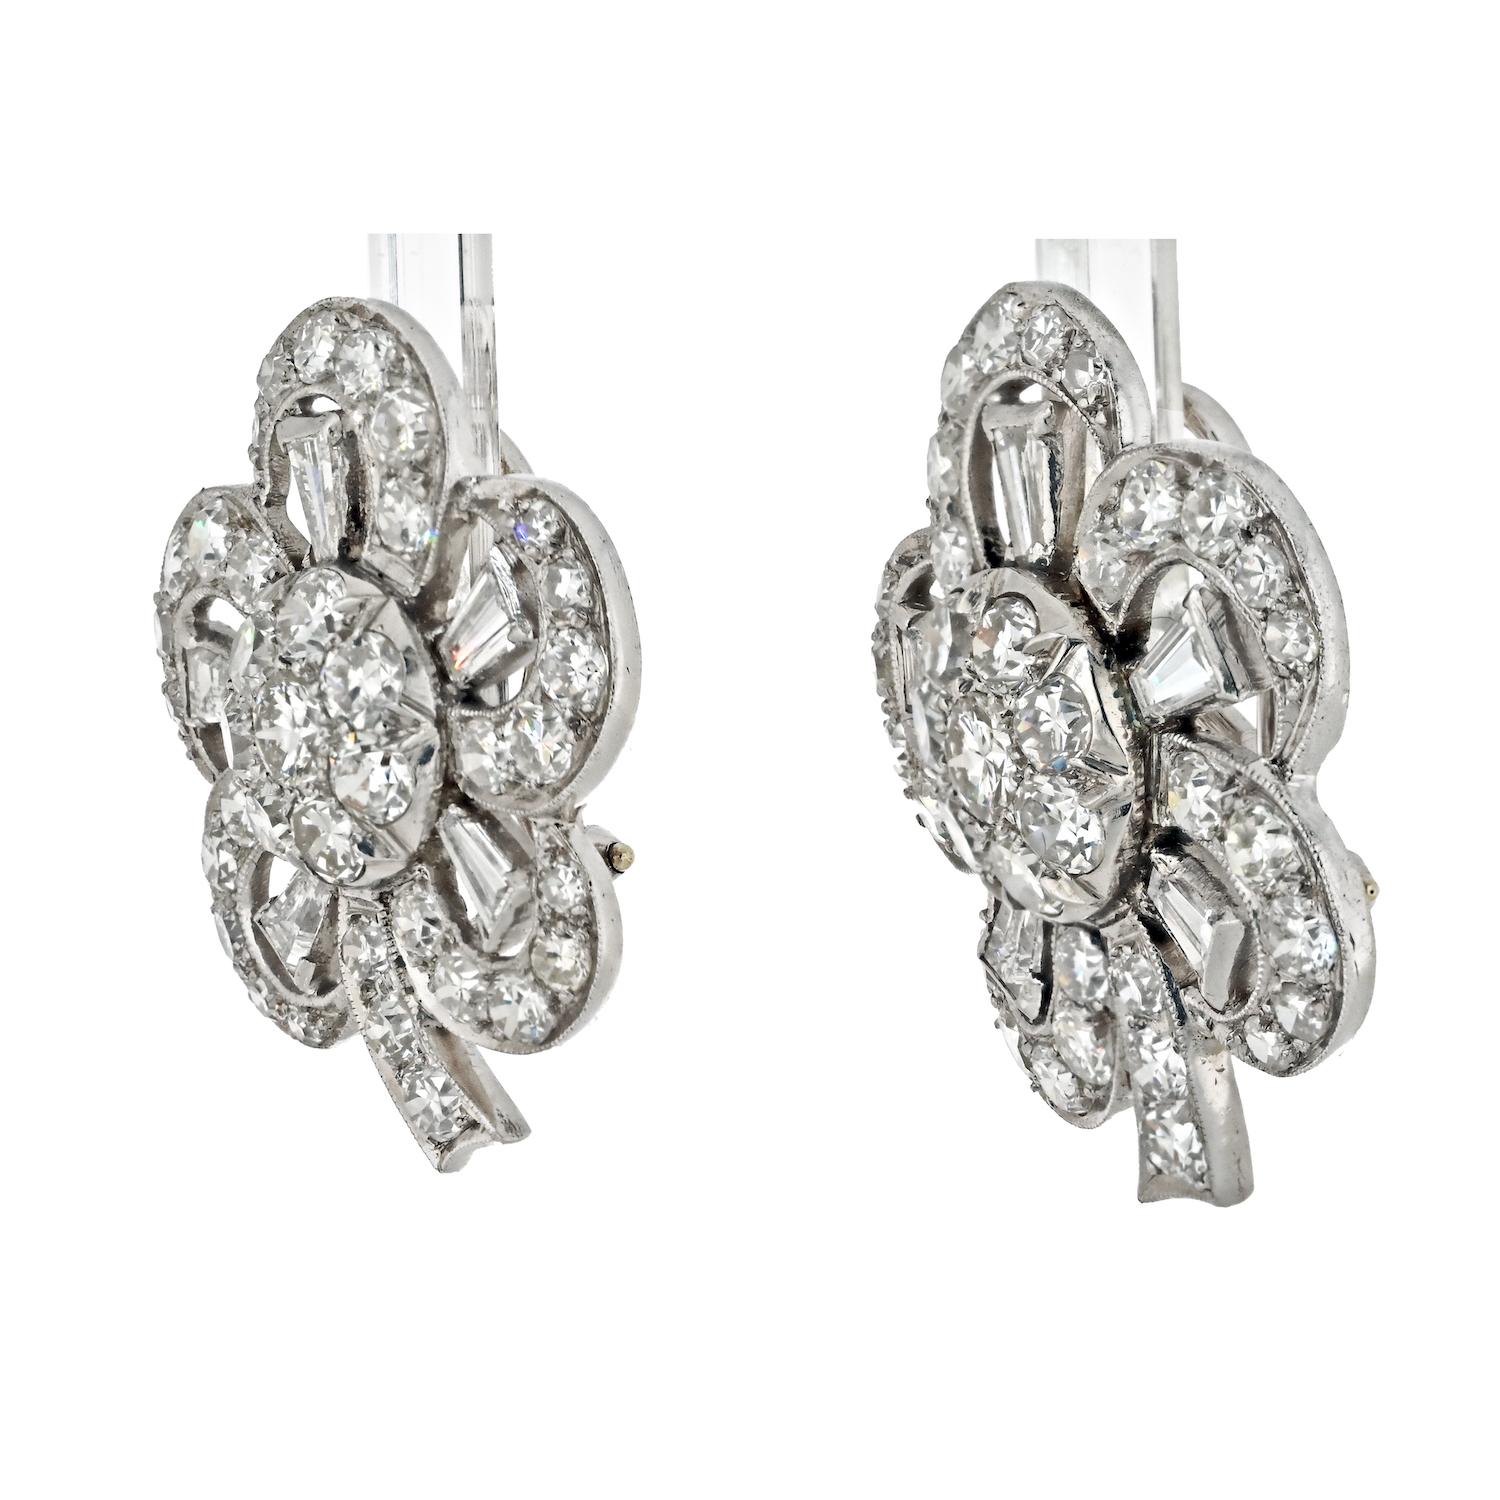 Retro Platinum 8.50cttw Baguette, Round Cut Diamond Flower Earrings In Excellent Condition For Sale In New York, NY